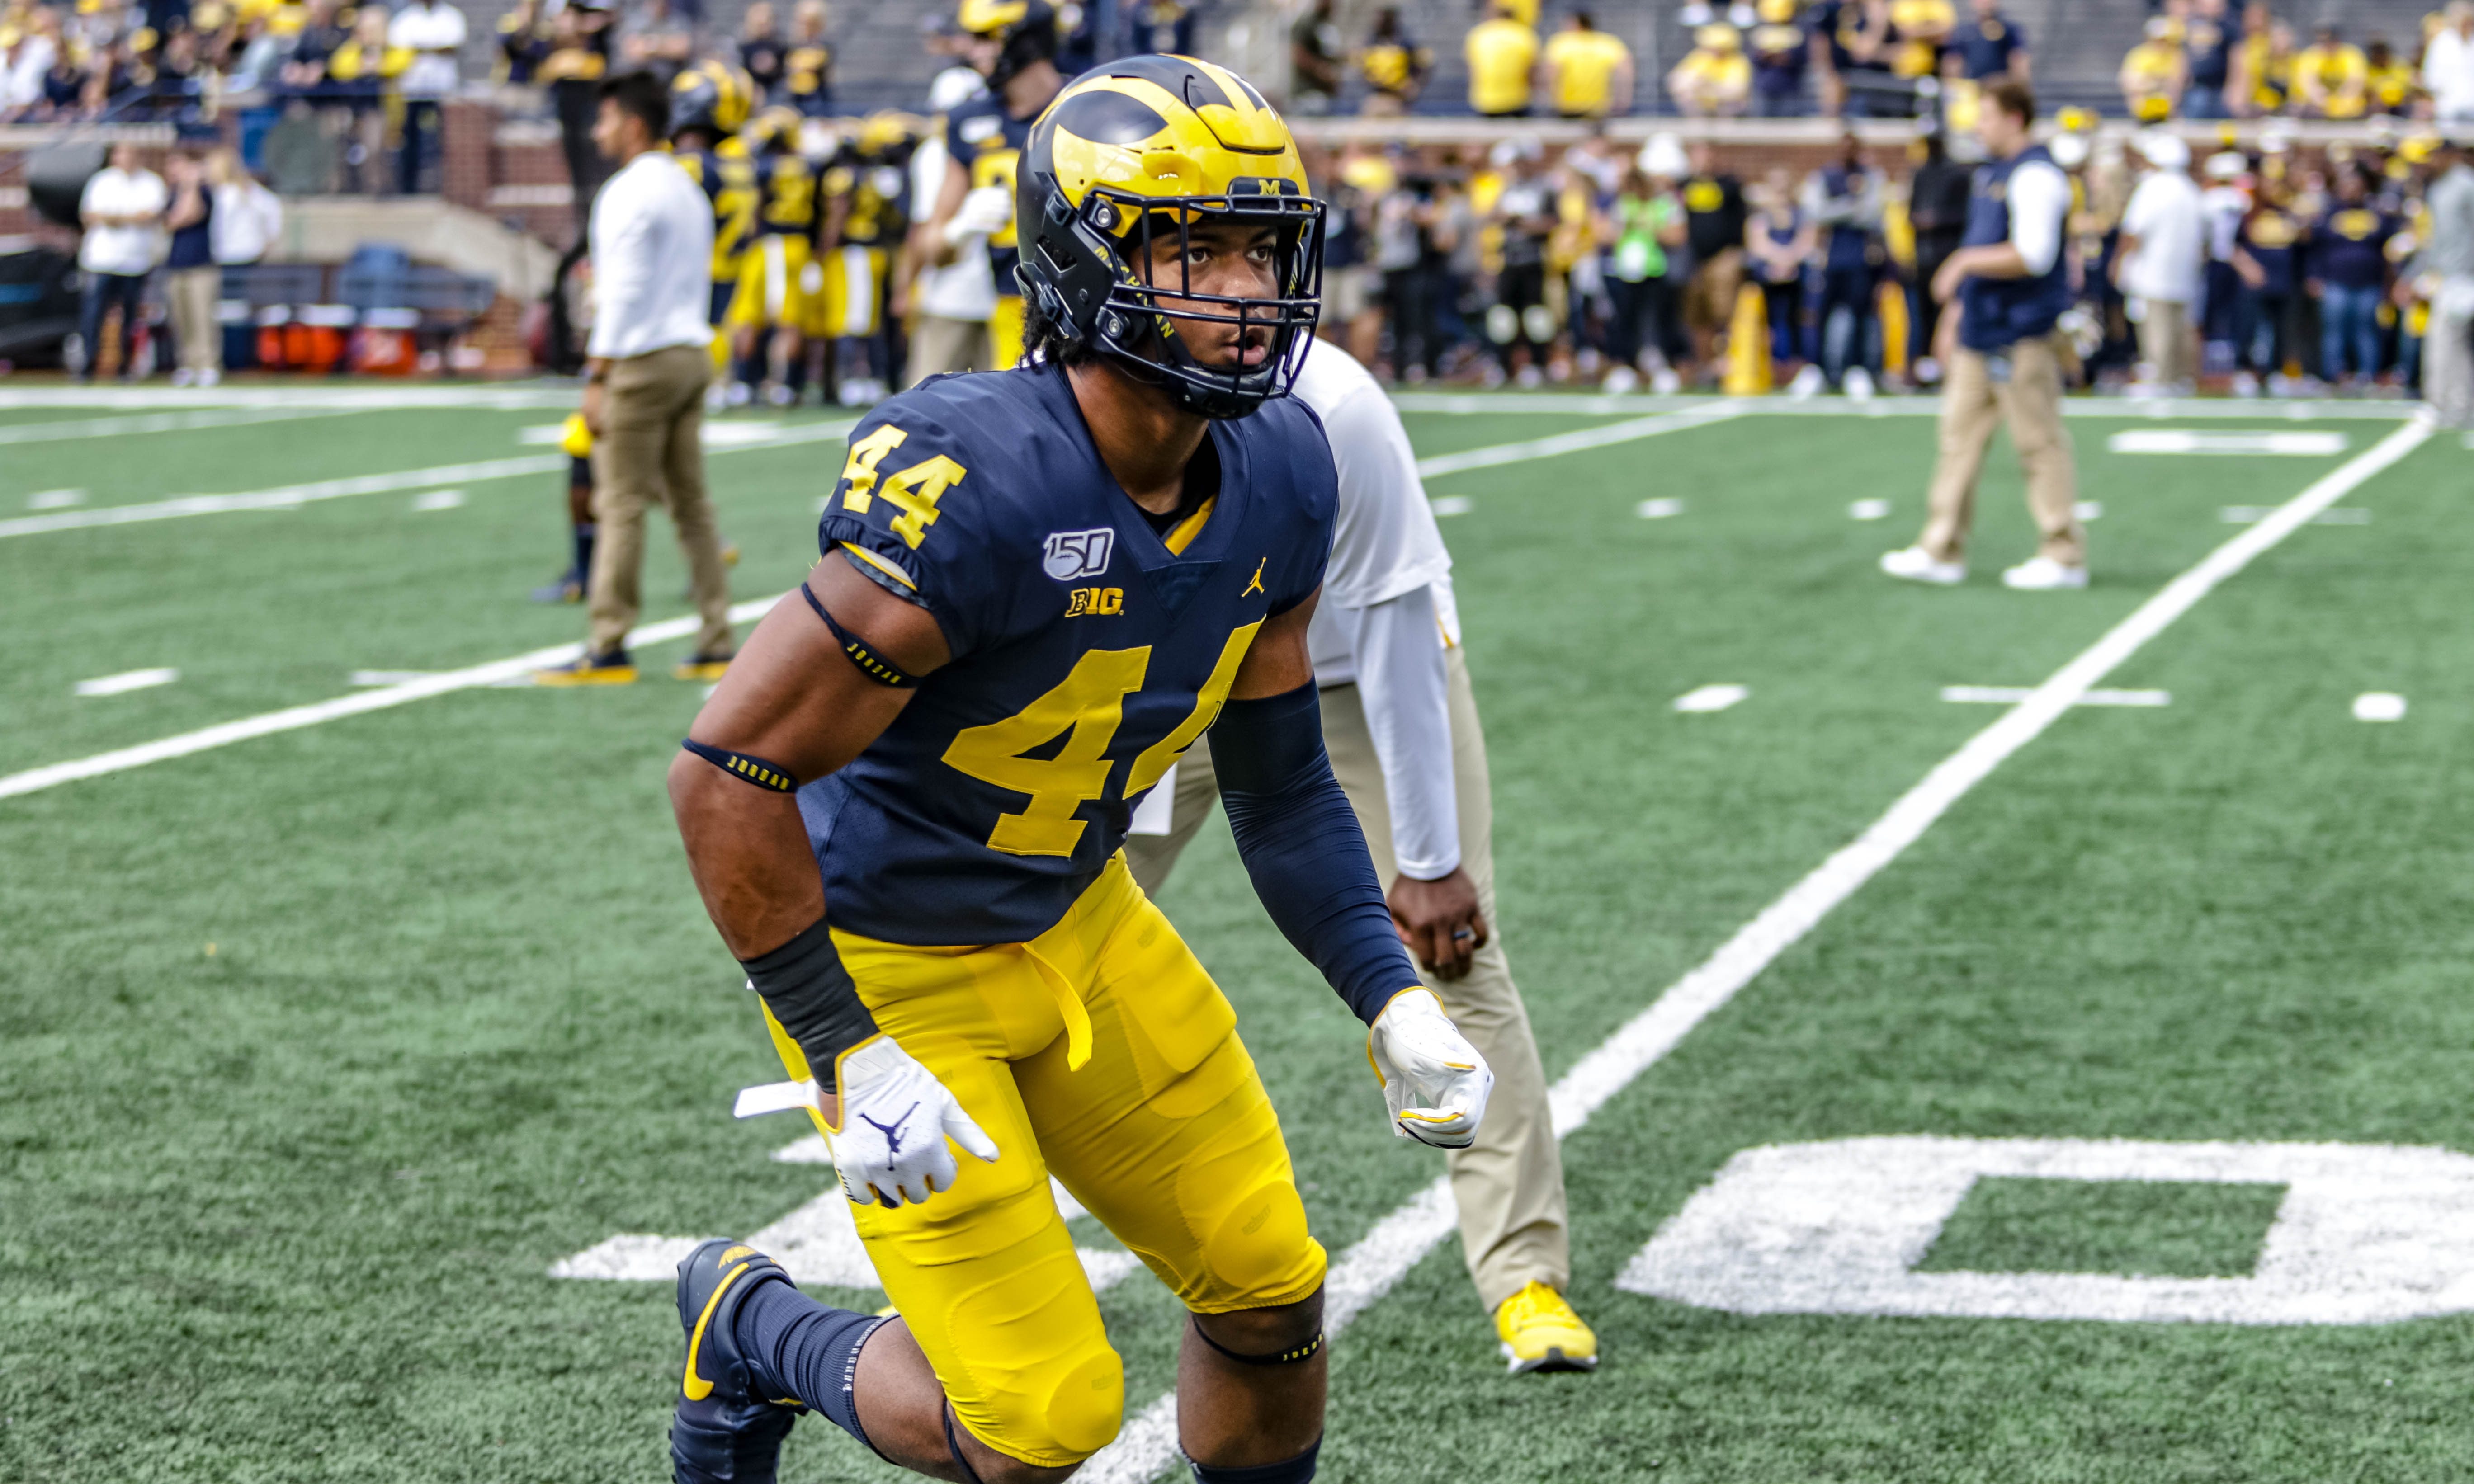 Michigan Linebackers In 2020 Who Will Be McGrone's Supporting Cast?